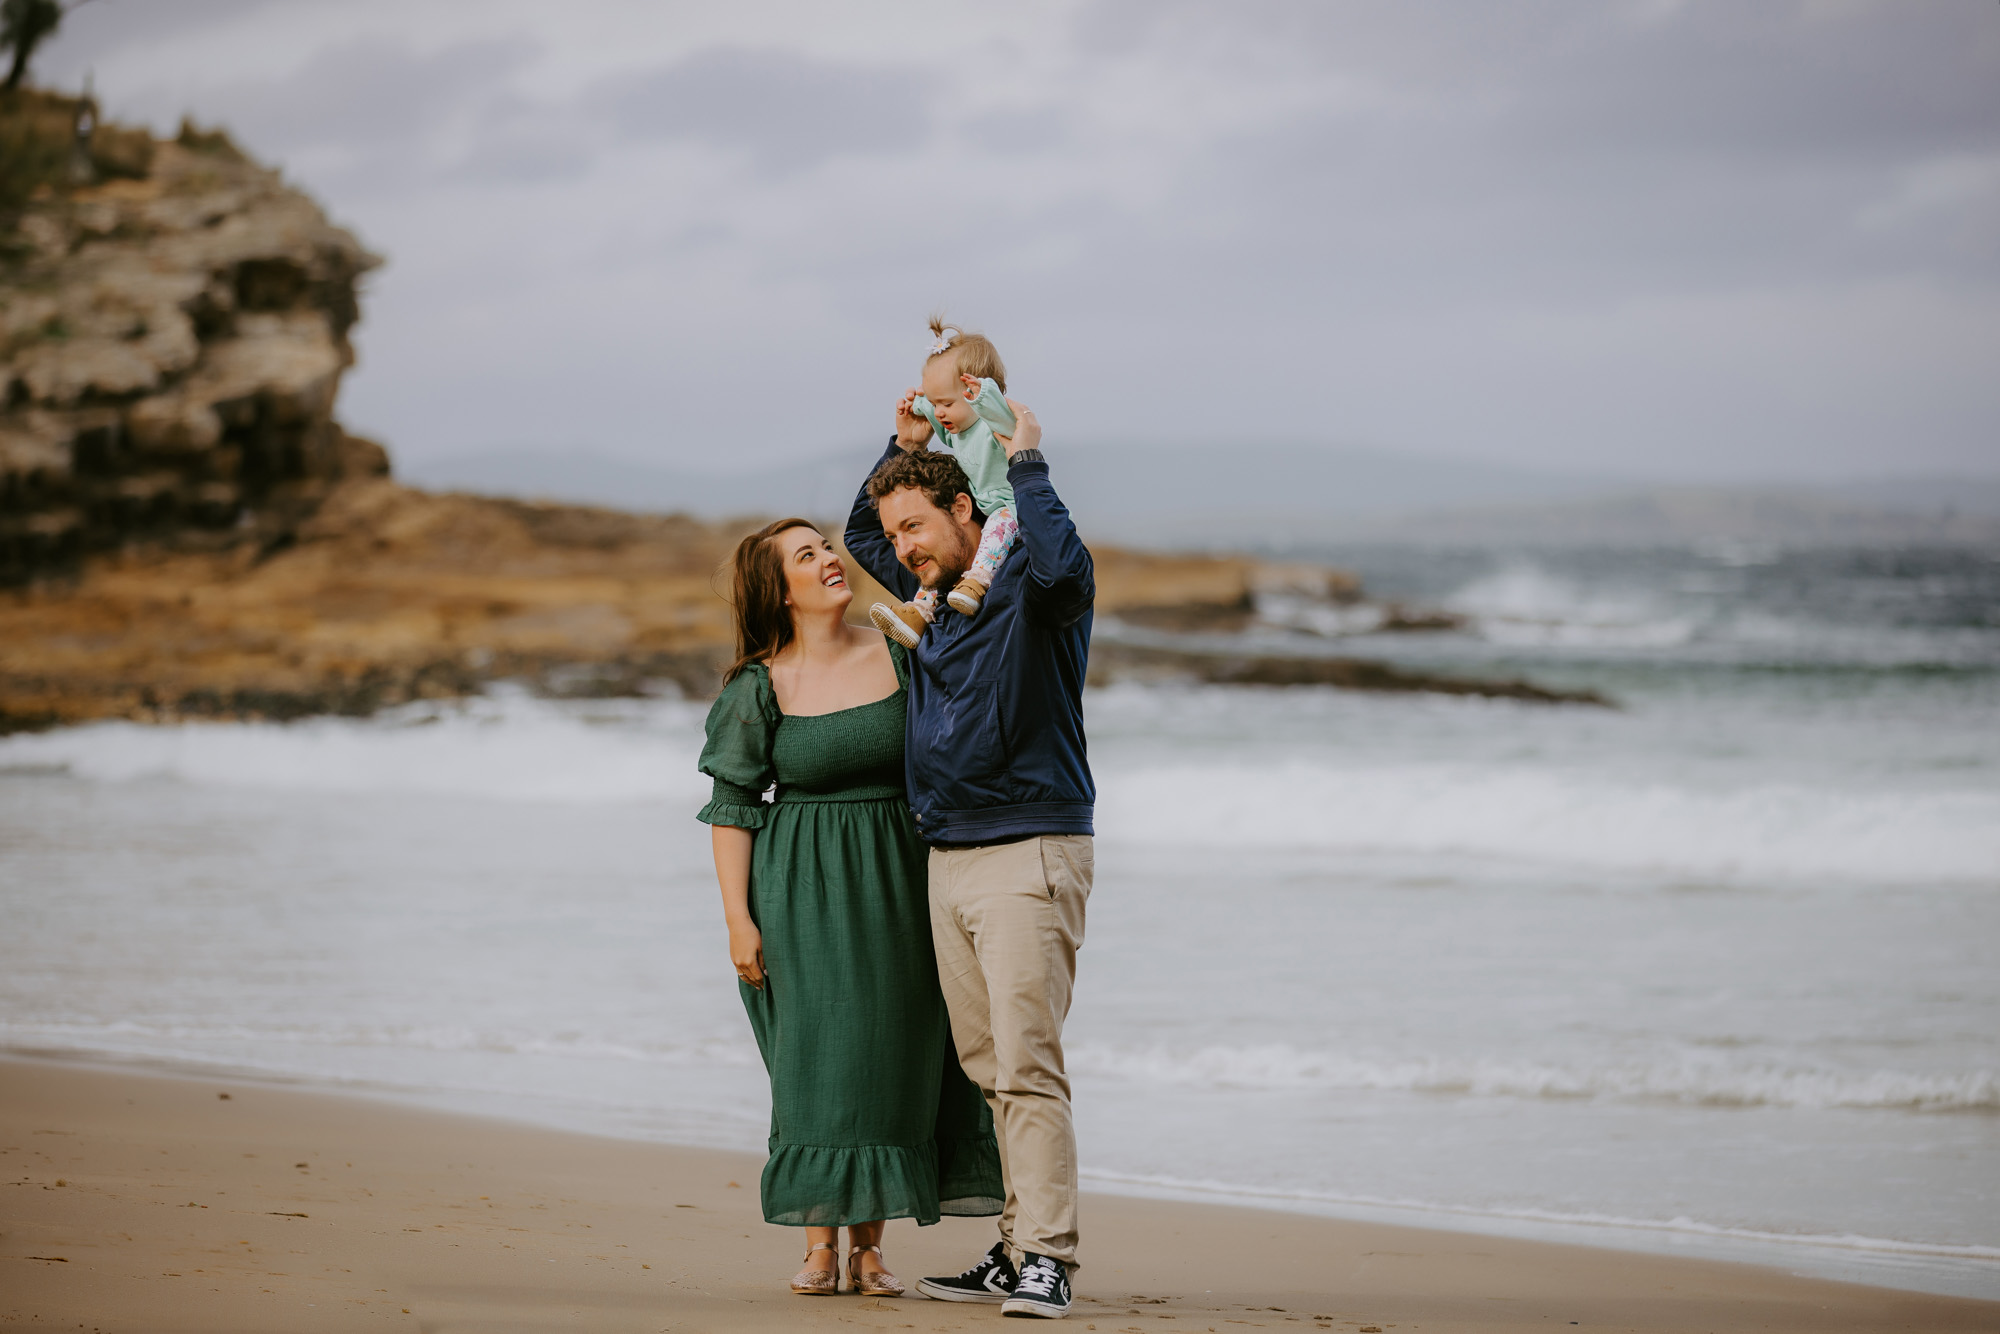 Blackmans Bay Beach Family by Ulla Nordwood – 0003